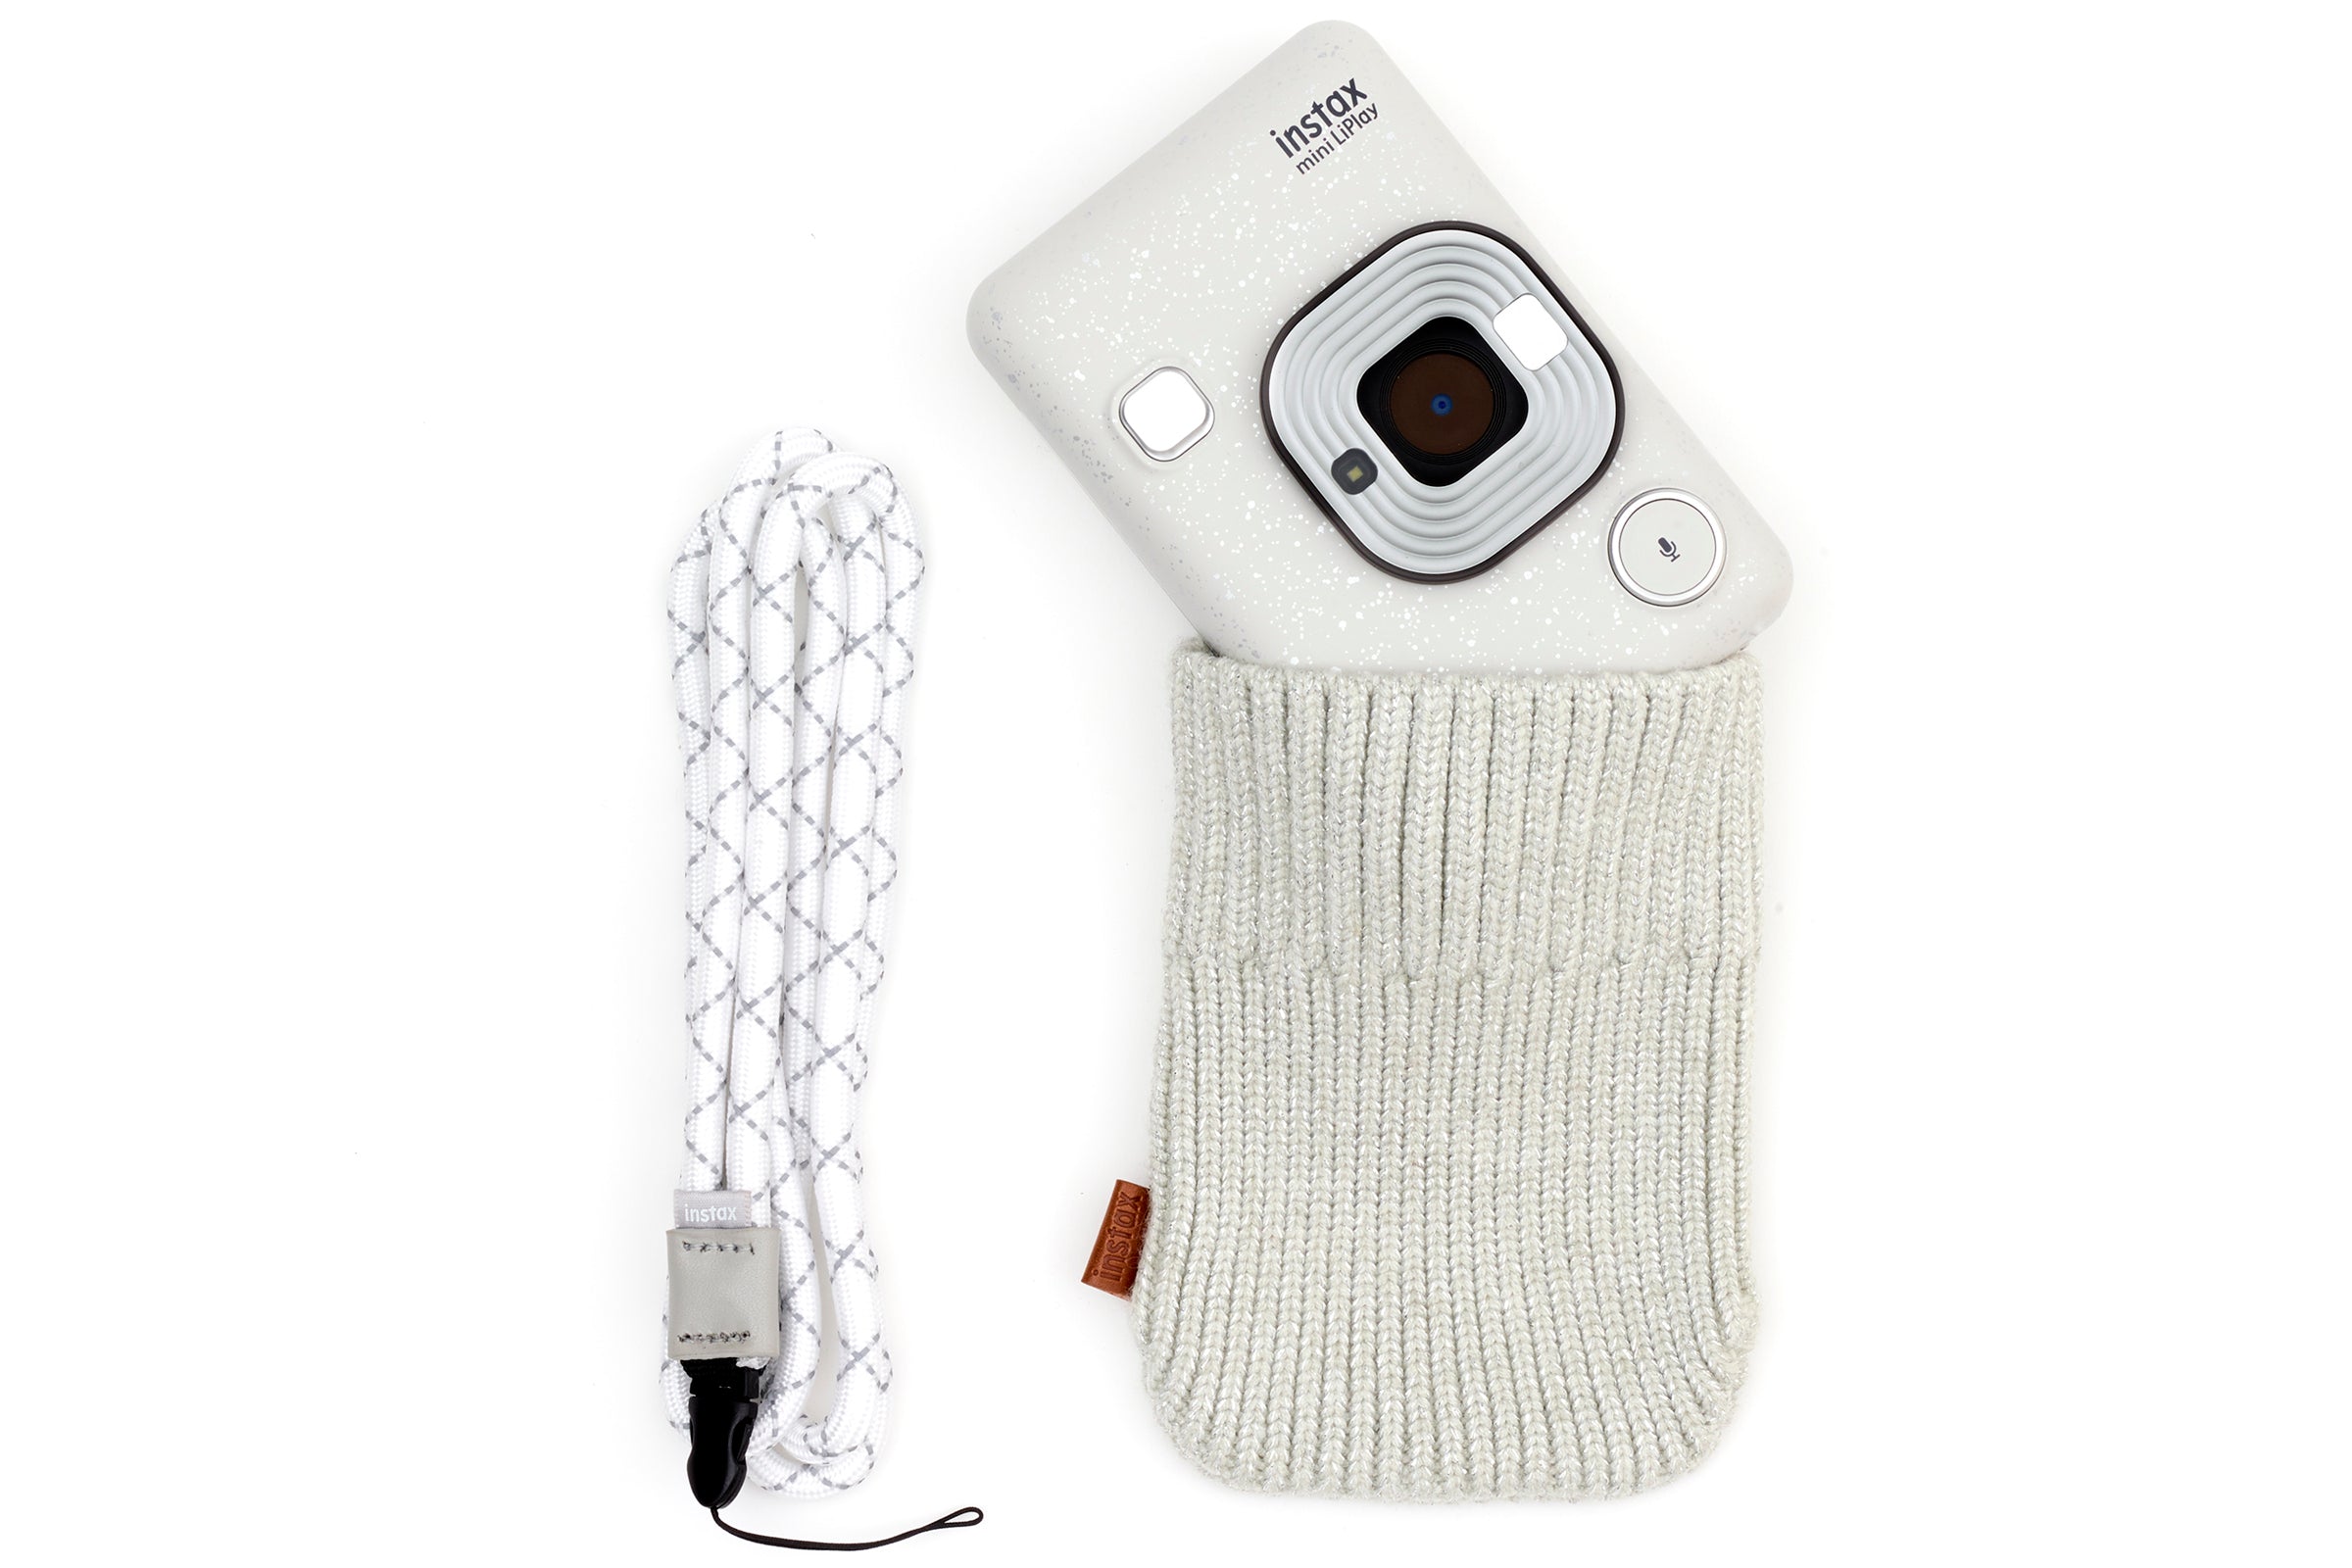 Fujifilm Instax Mini Liplay Accessory Kit with Neck Strap & Knitted Pouch - Stone White - maplin.co.uk